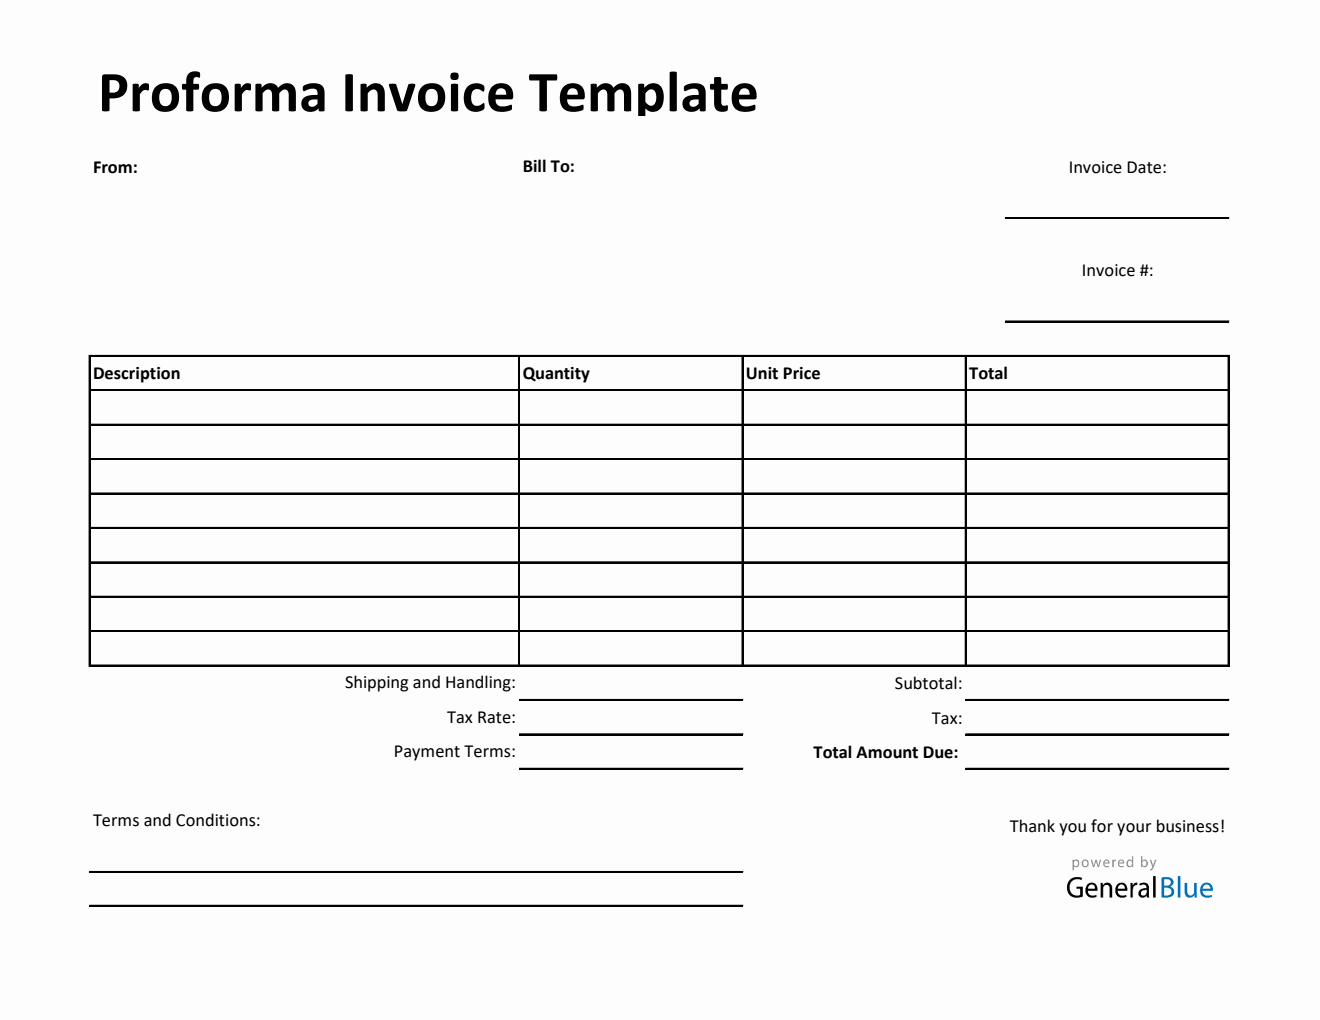 Printable Proforma Invoice Template in Excel